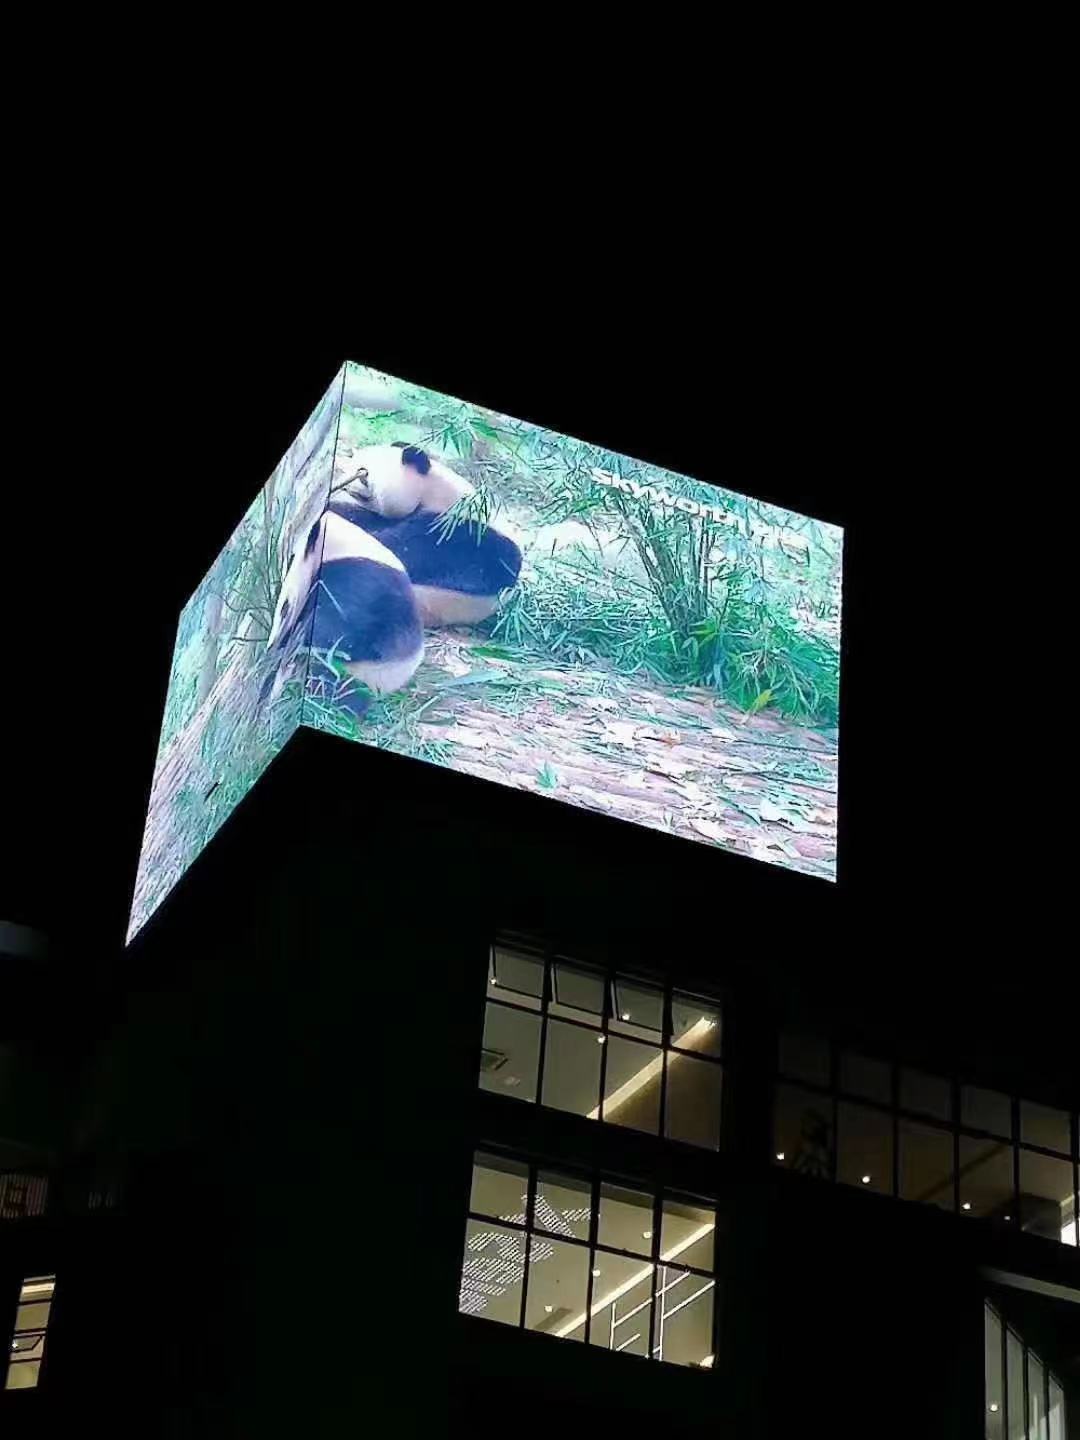 Outdoor led screen